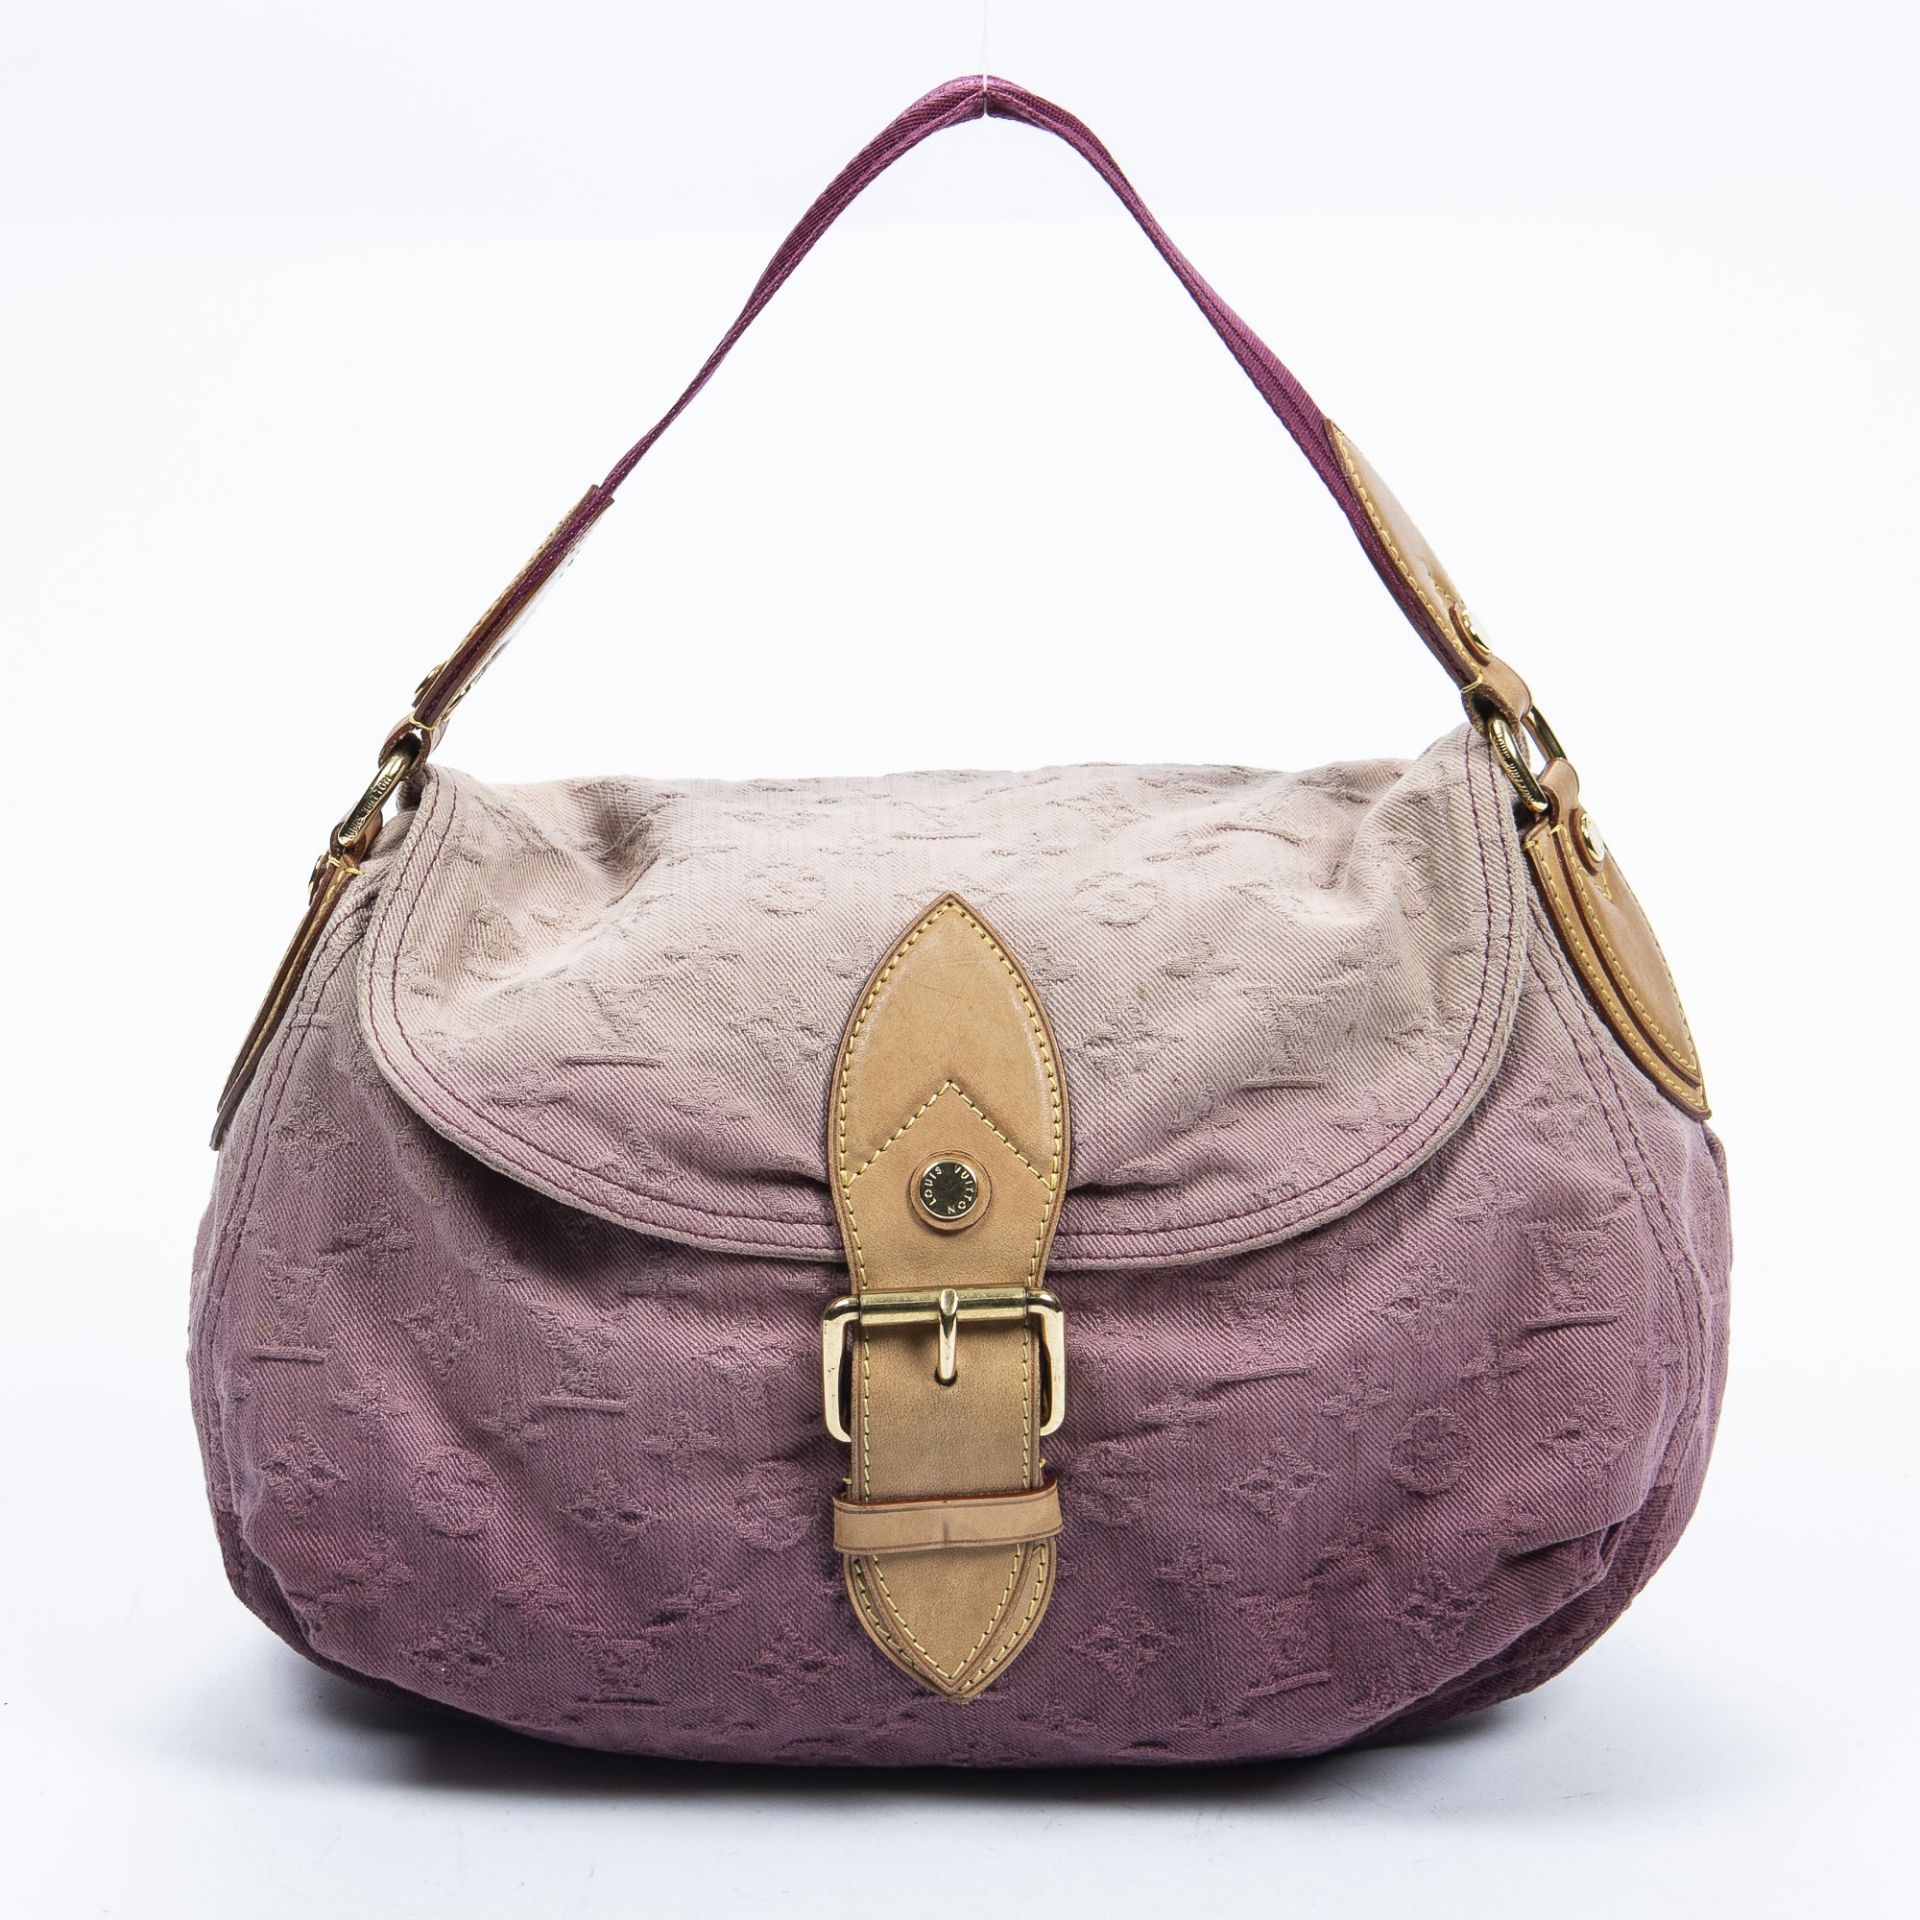 RRP £1,350.00 Lot To Contain 1 Louis Vuitton Coated Canvas Sunshine shoulder Bag In Gradient